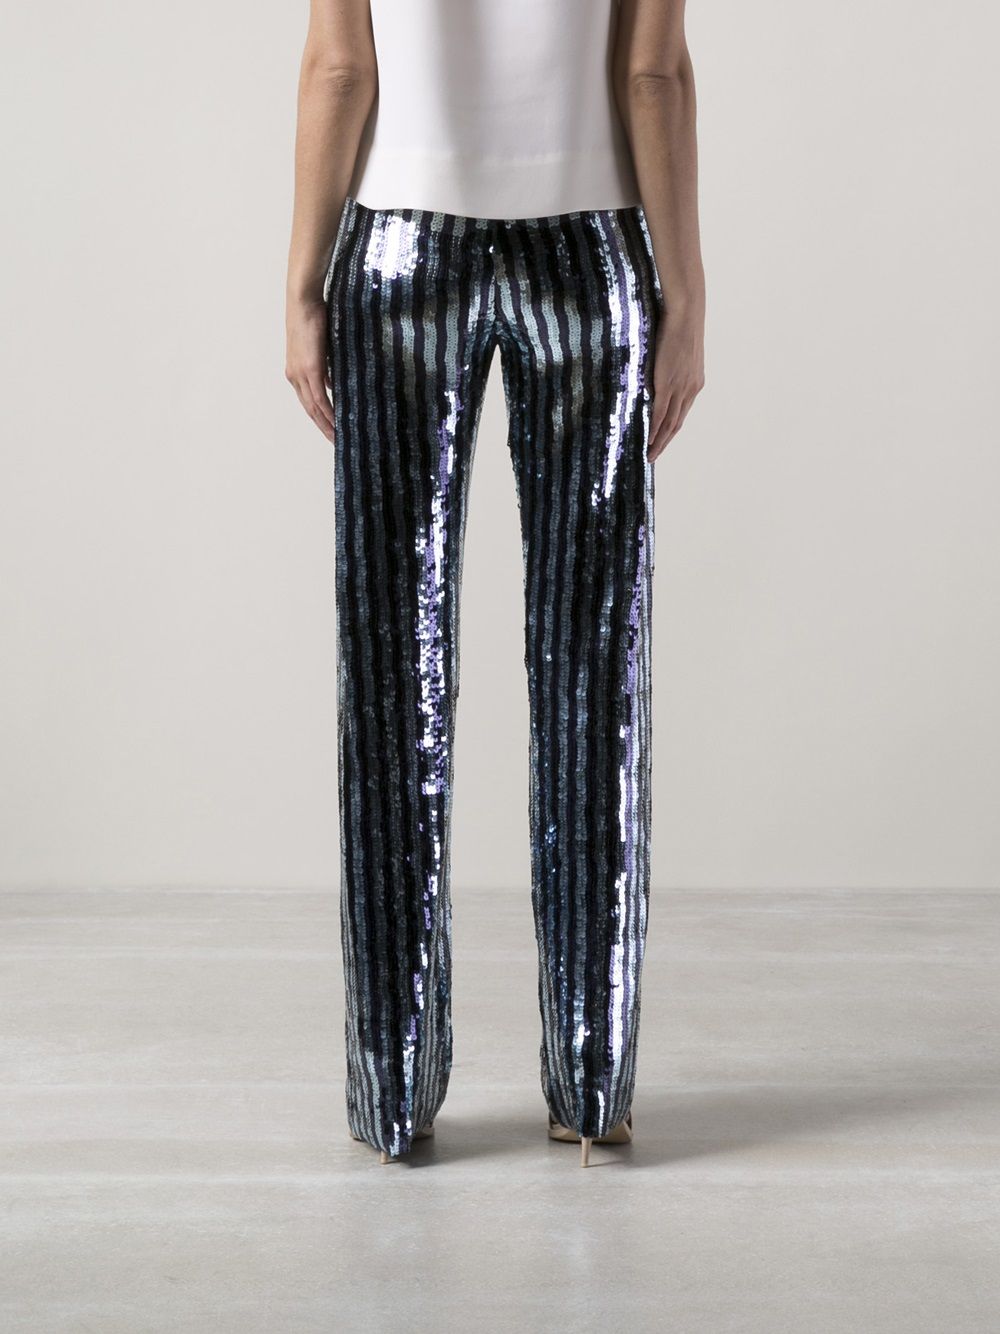 Marc Jacobs Mia Sequin Striped Pants in Blue - Lyst